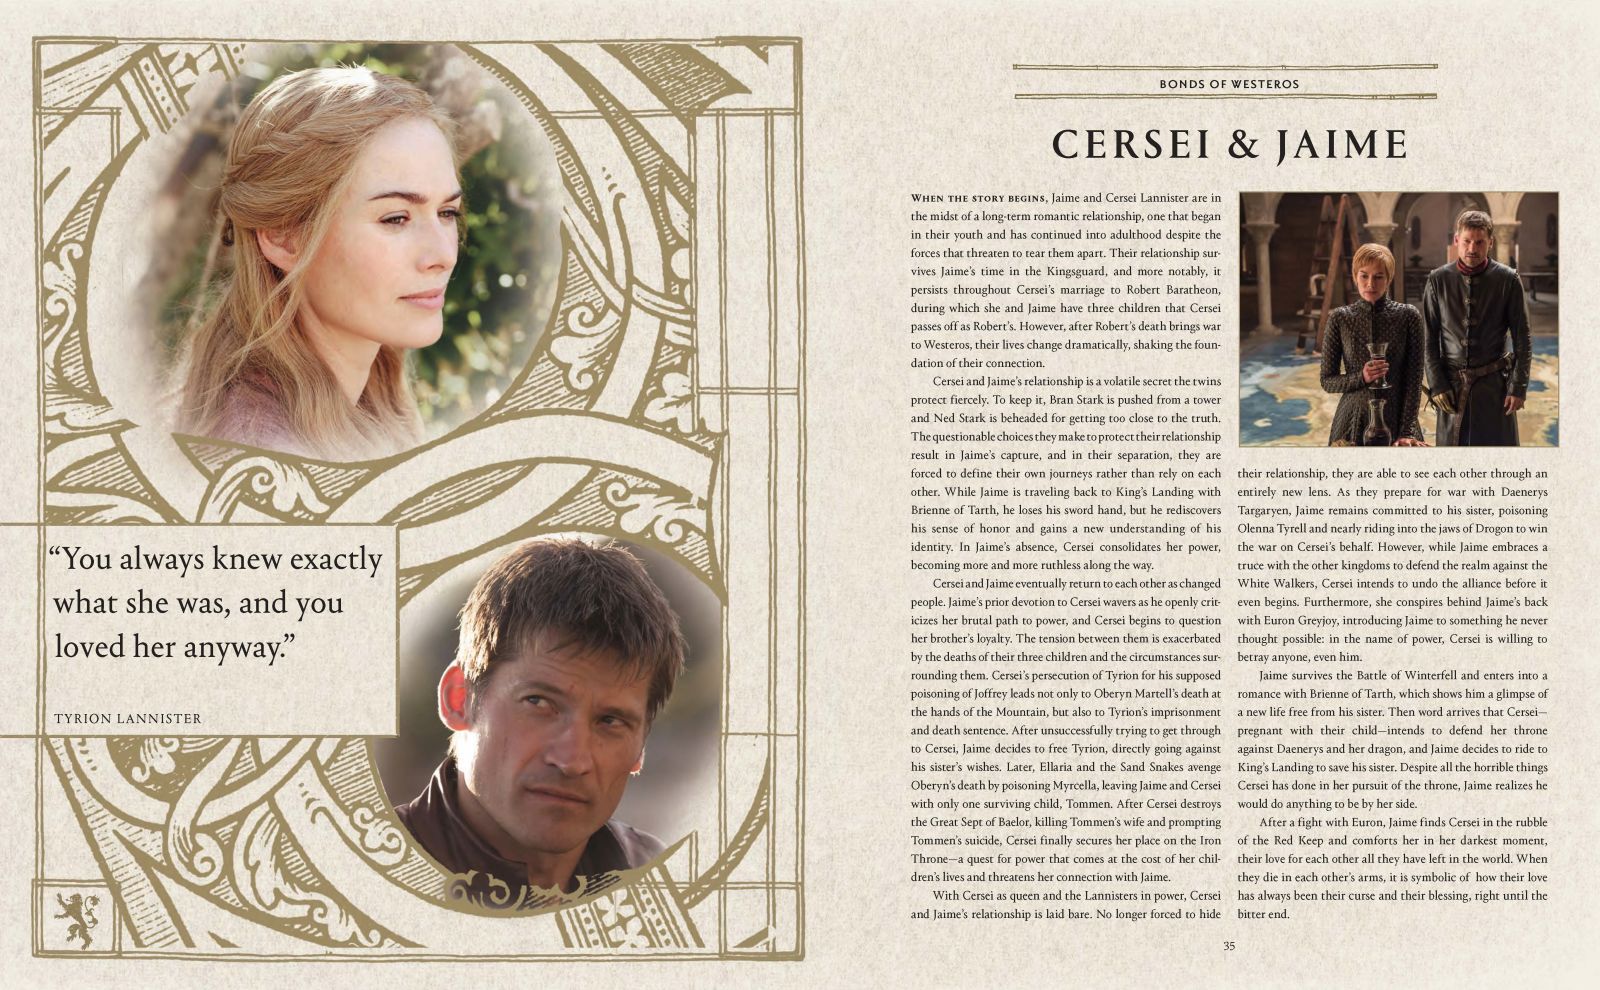 Take a look at just some of the essays and infographics found inside A Guide to Westeros and Beyond.